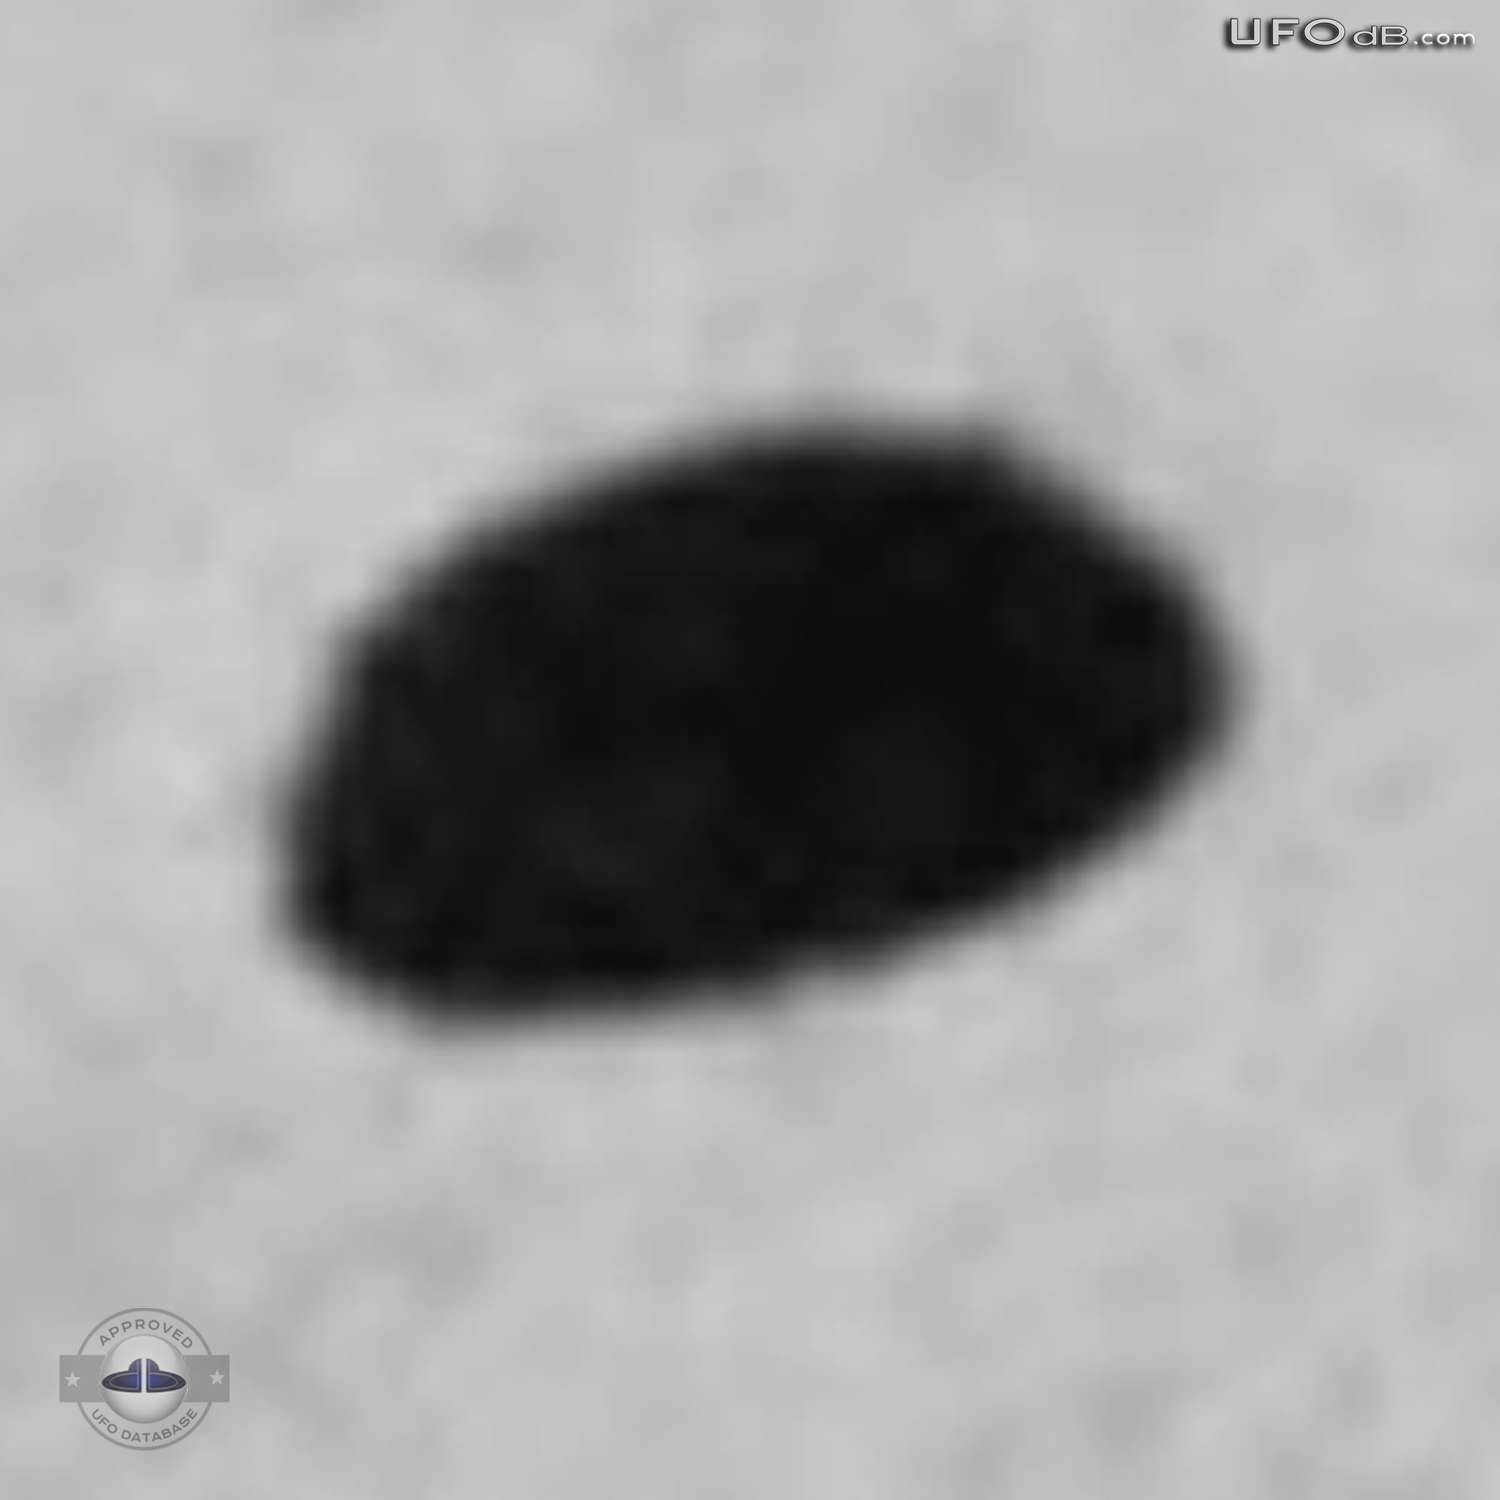 Japan University student shoot picture of UFO passing over his house UFO Picture #353-4